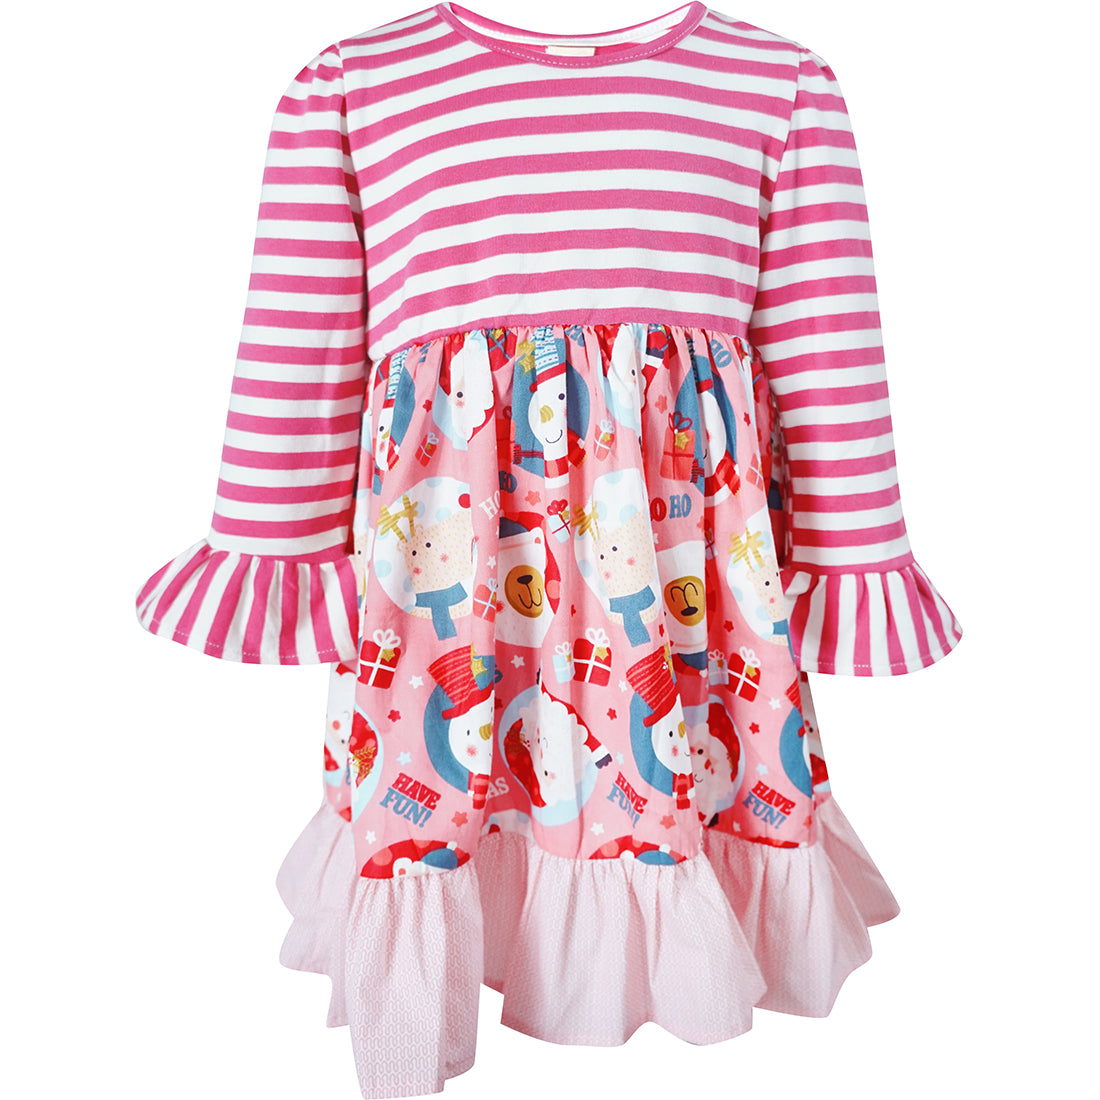 Baby Toddler Little Girl Christmas Santa Clause Twirl Dress - Hot Pink Stripes